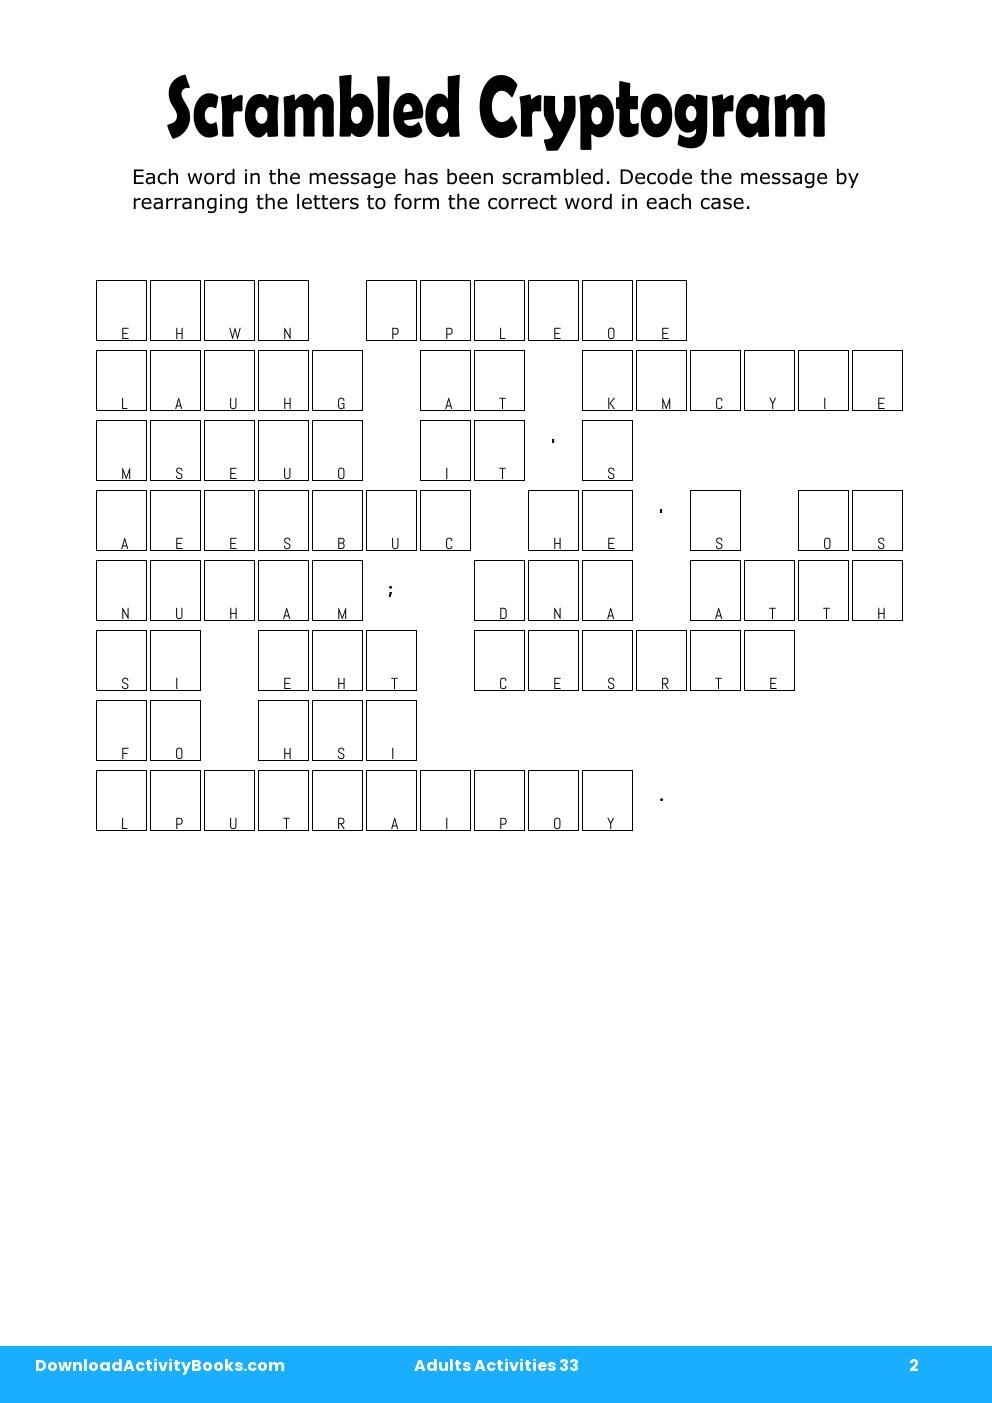 Scrambled Cryptogram in Adults Activities 33